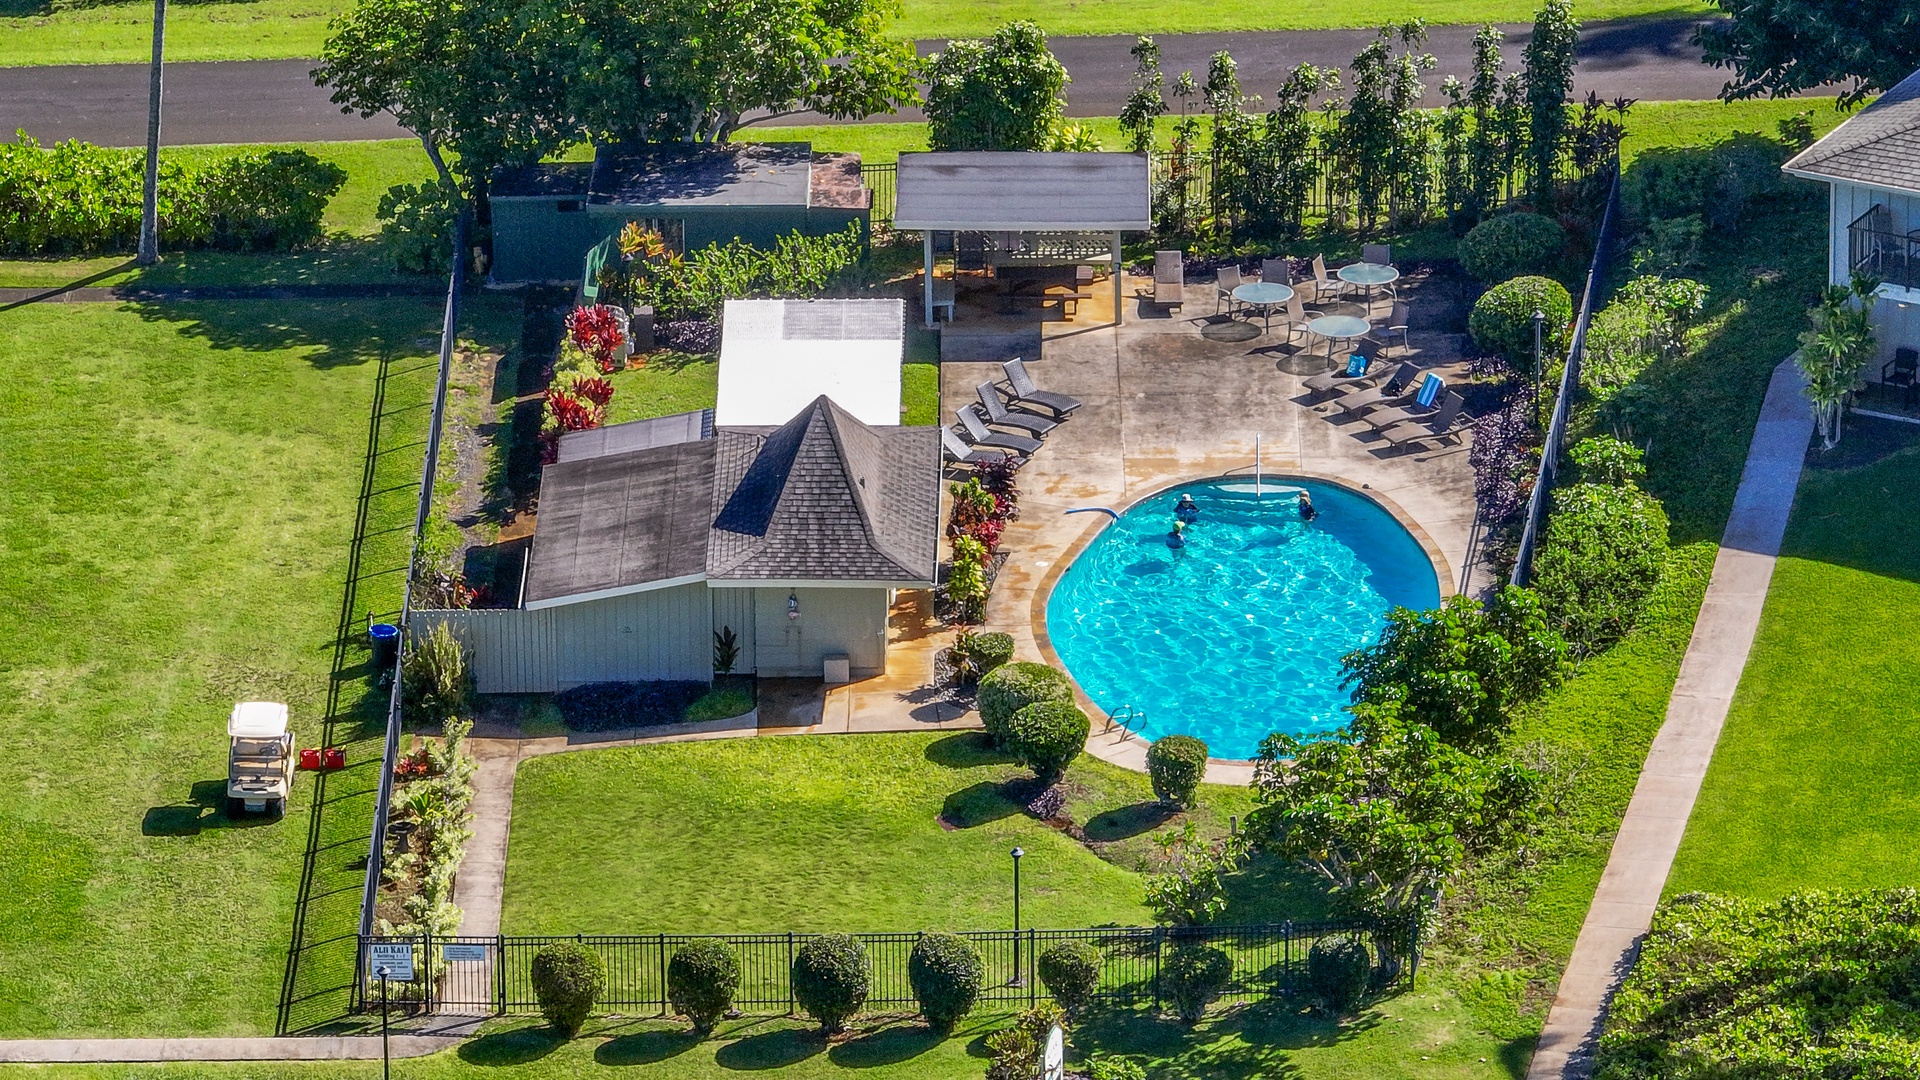 Princeville Vacation Rentals, Alii Kai 7201 - Aerial shot of the community pool with poolside loungers.